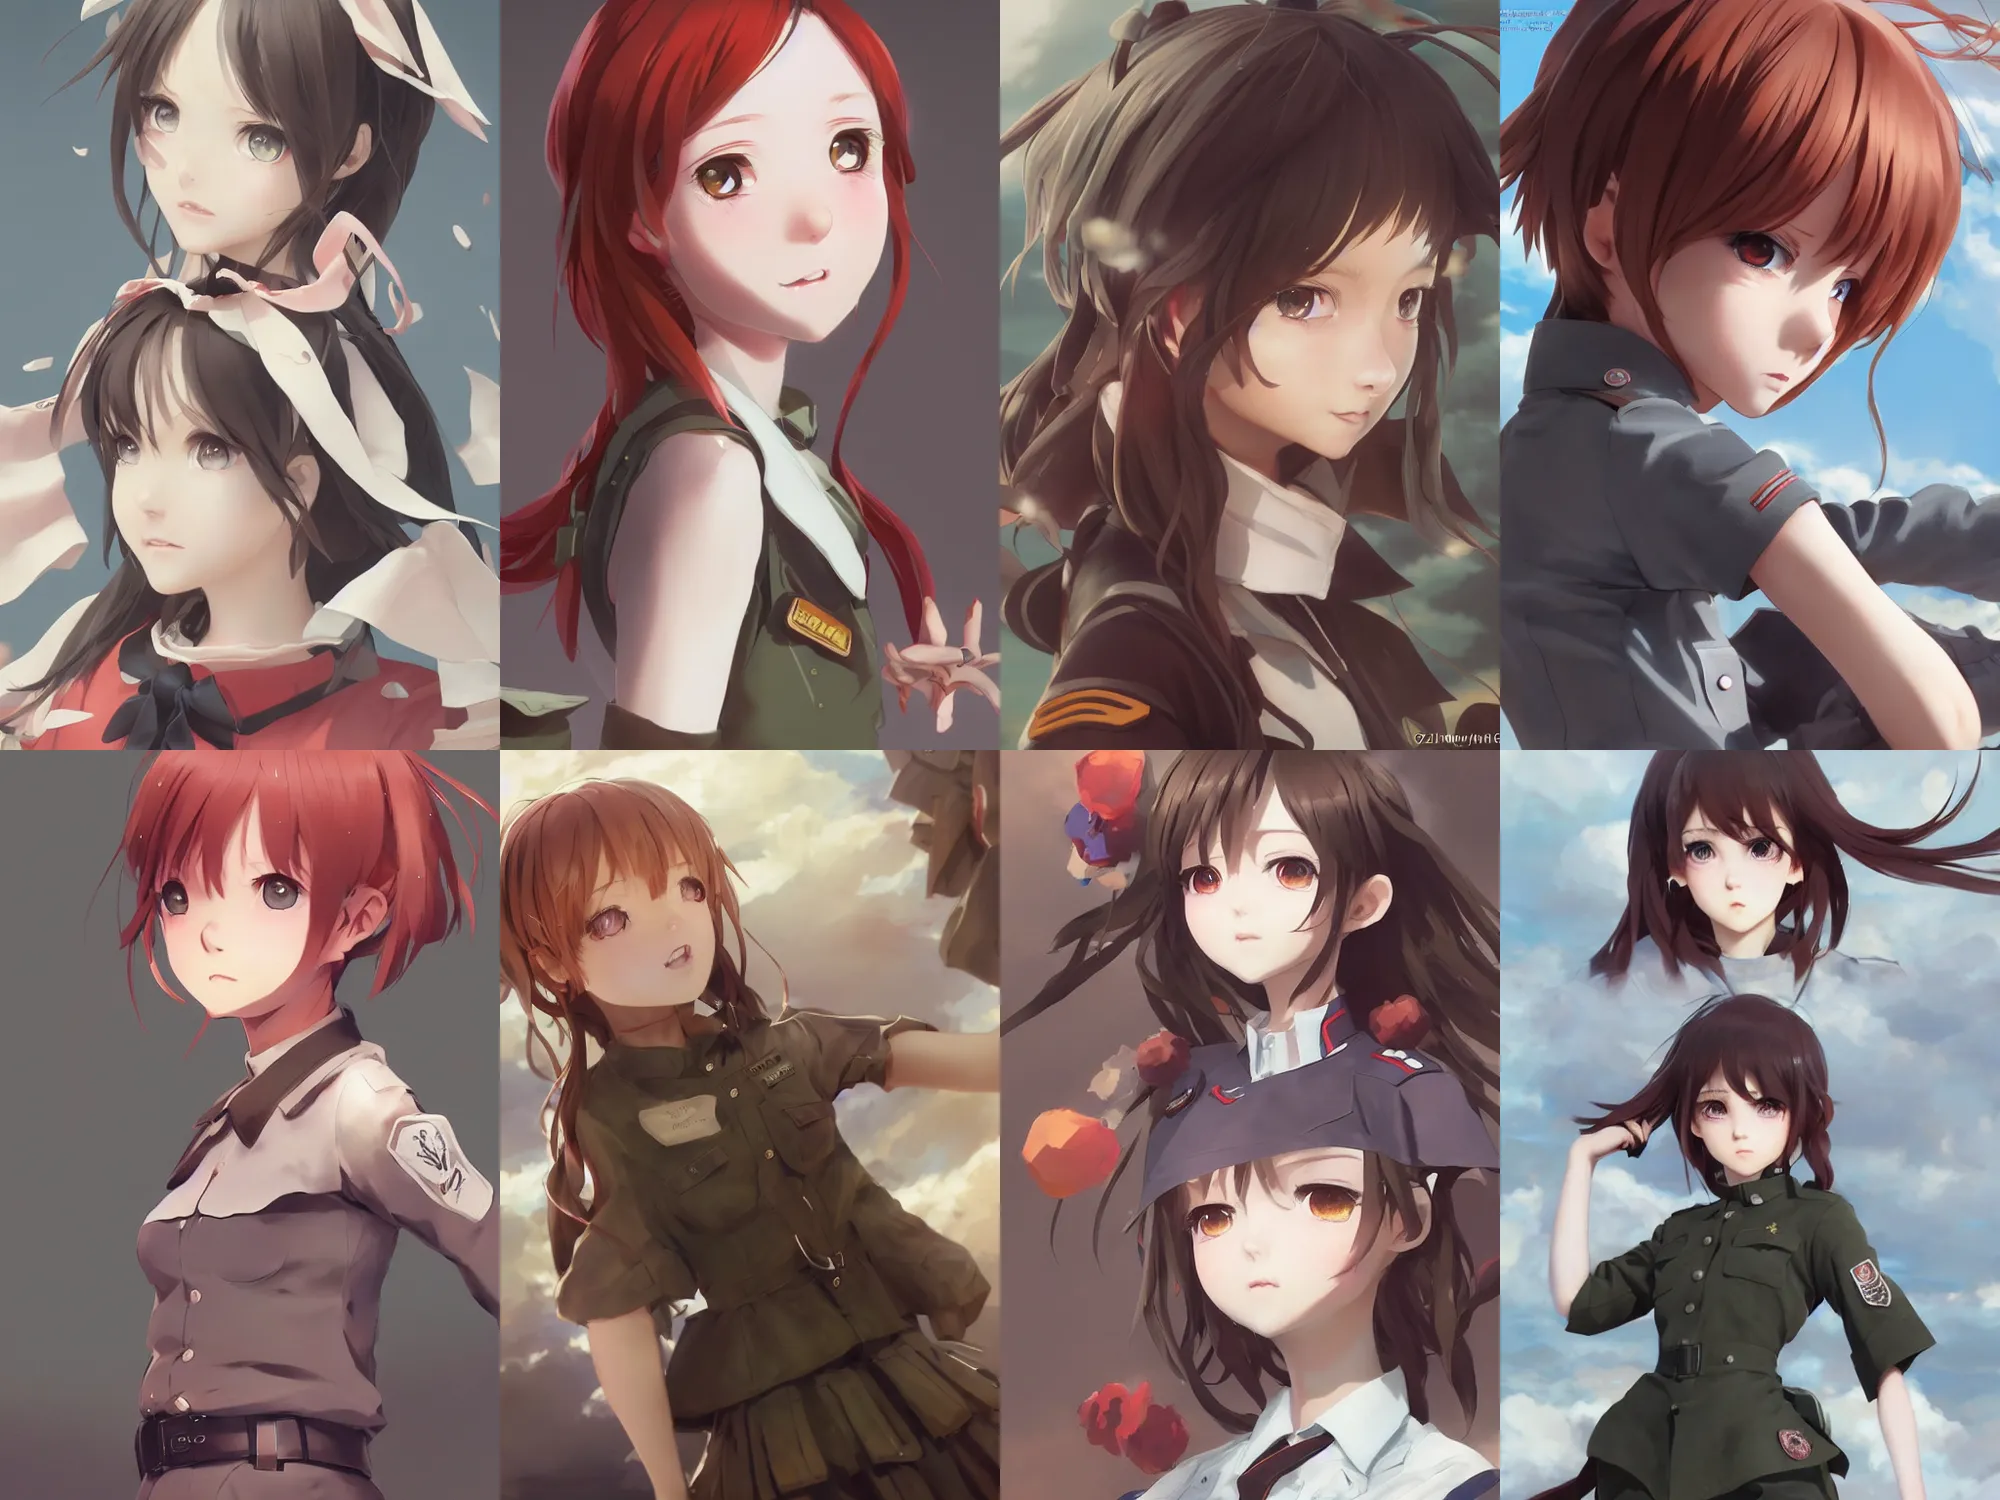 Prompt: Very complicated dynamic composition, realistic anime style at Pixiv CGSociety by WLOP, ilya kuvshinov, krenz cushart, Greg Rutkowski, trending on artstation. Zbrush sculpt colored, Octane render in Maya and Houdini VFX, young redhead girl in motion, cute, innocent, she expressing joy, wearing military uniform, silky hair, stunning deep eyes. In cityscape. Very expressive and inspirational. Amazing textured brush strokes. Cinematic dramatic atmosphere, soft volumetric studio lighting.